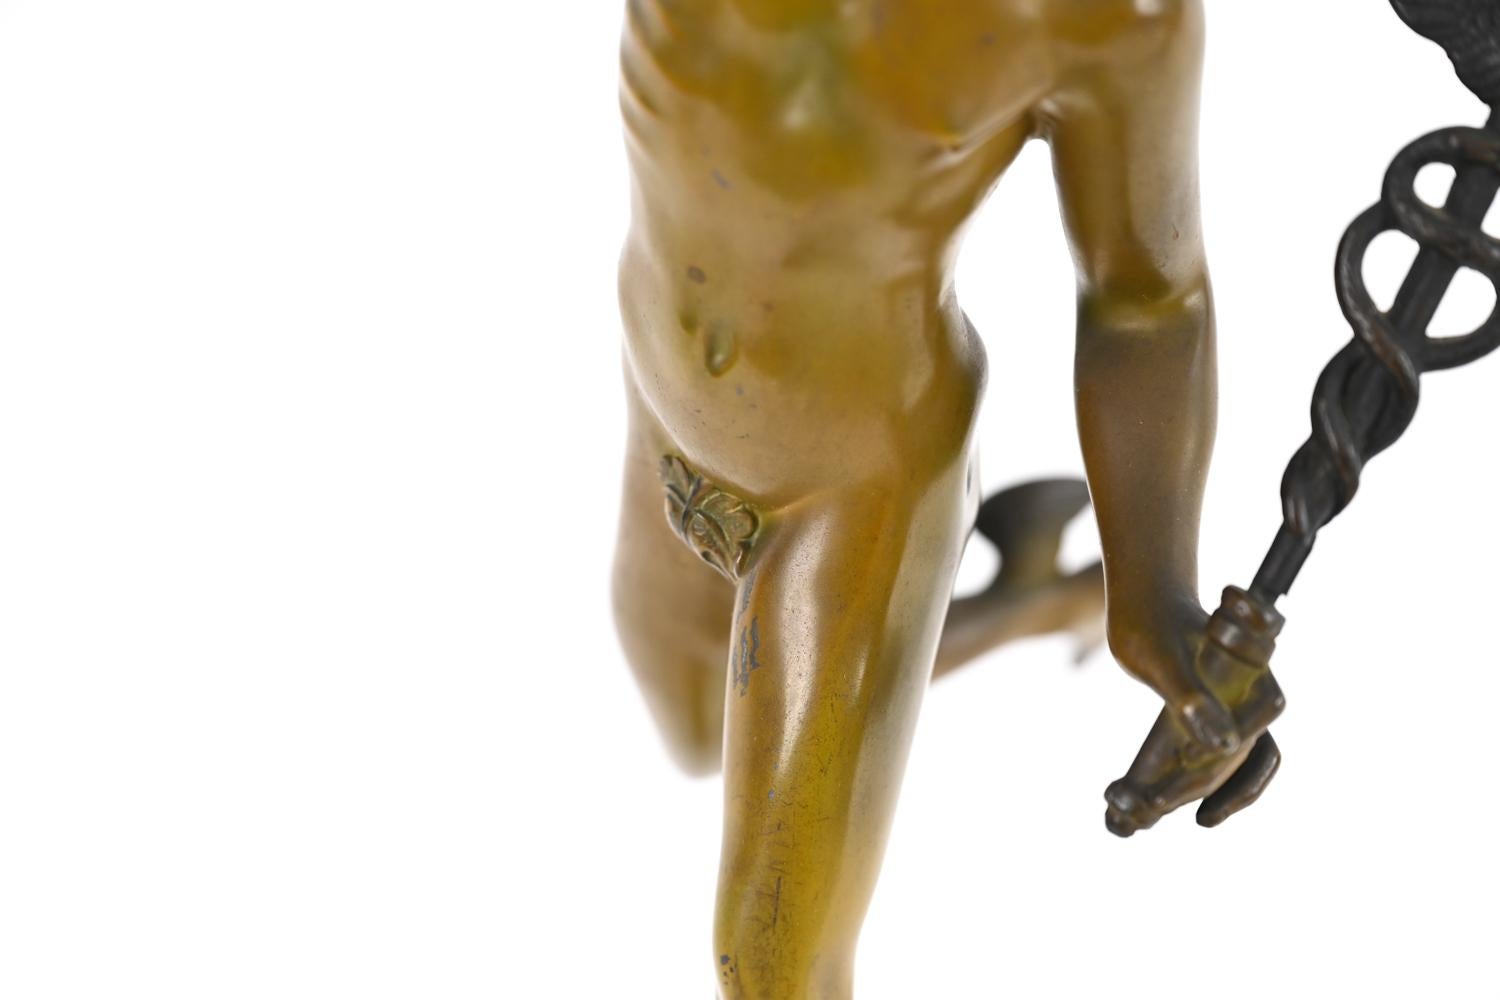 Spelter After Giambologna Mercury Sculpture For Sale